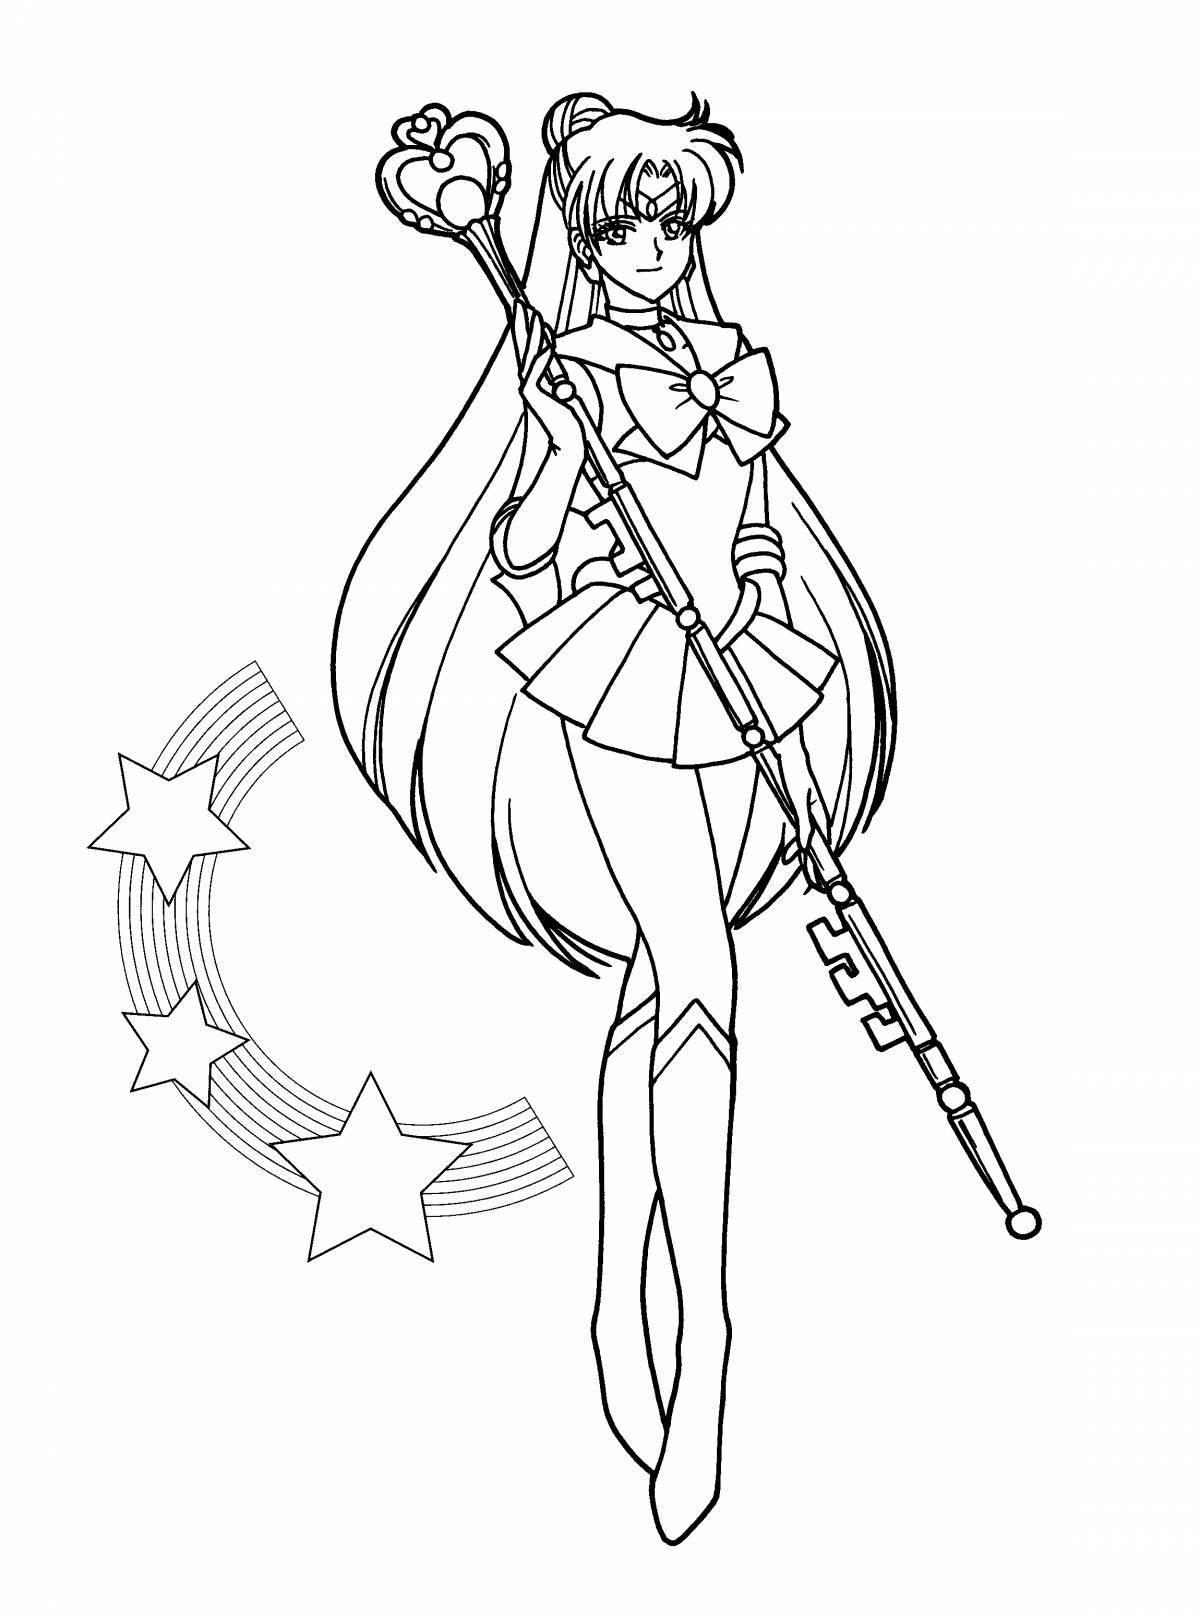 Awesome sailor moon coloring page